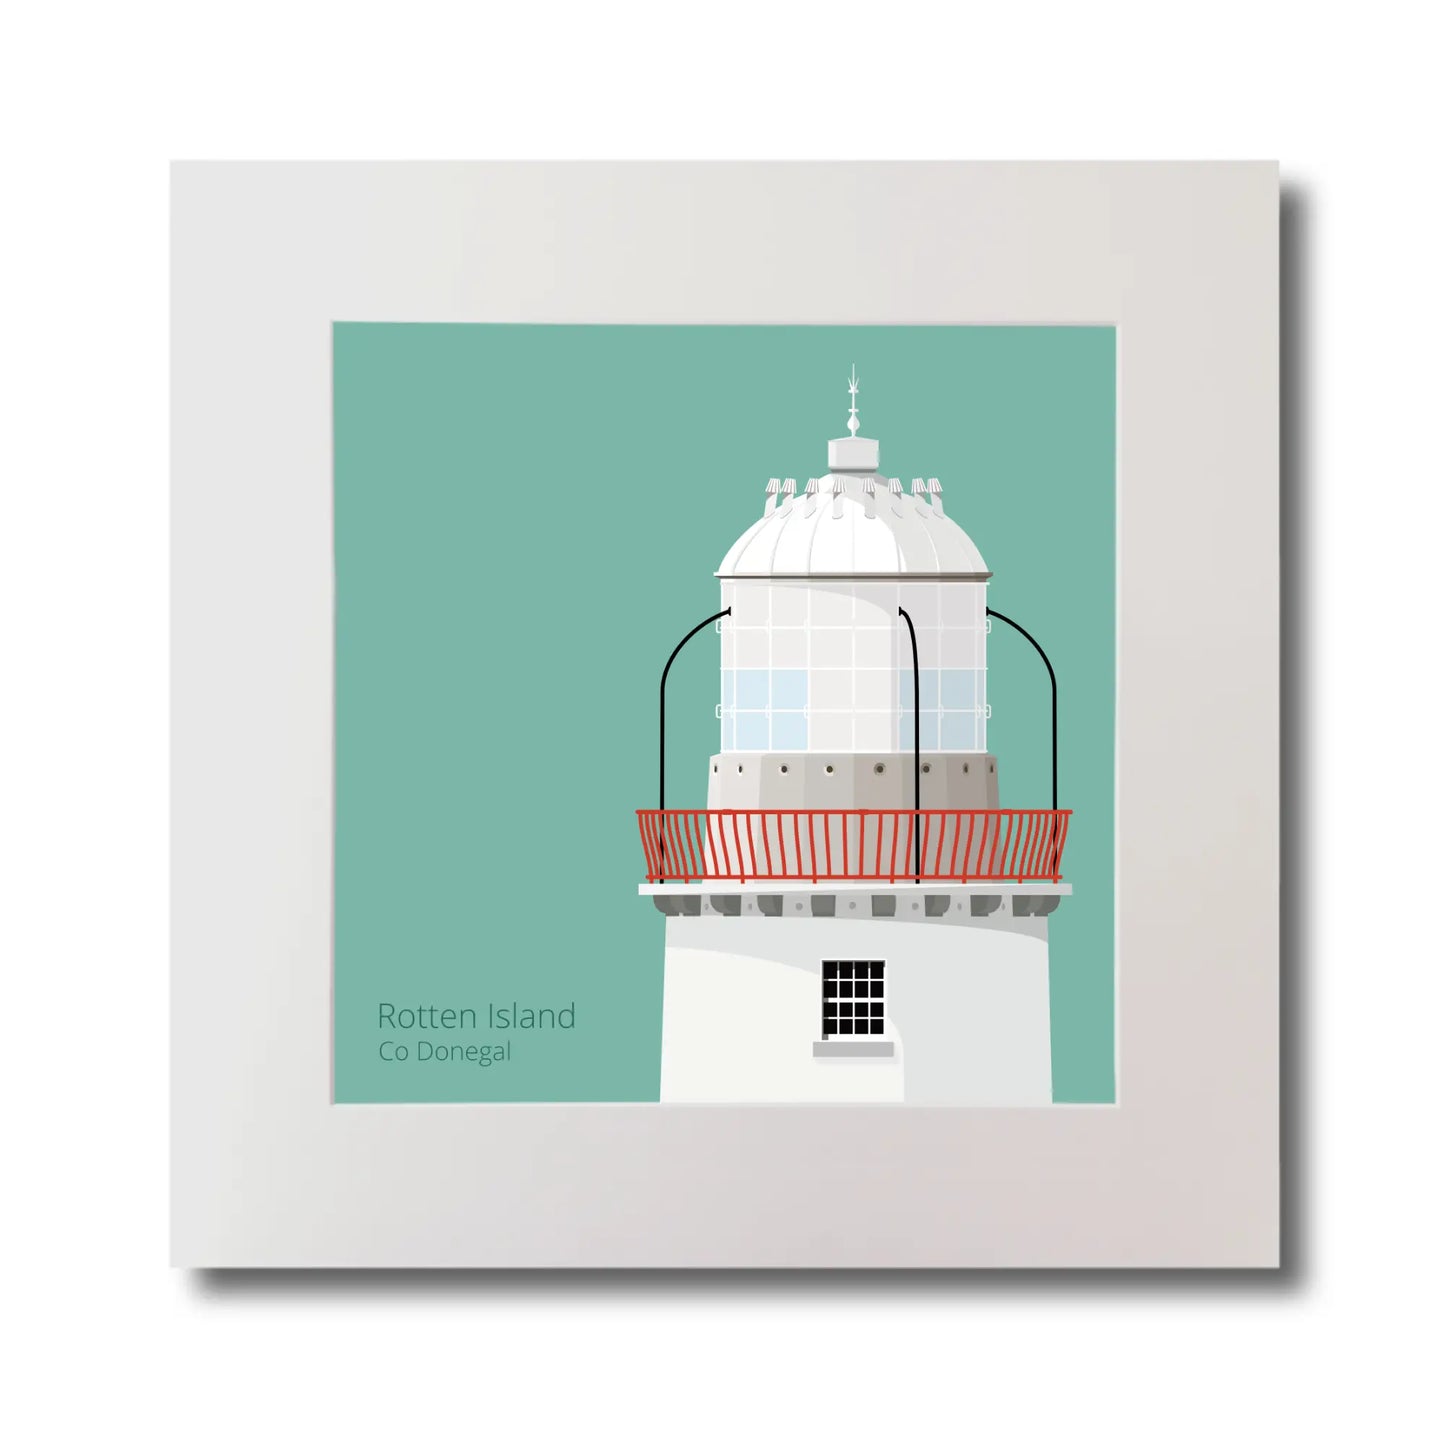 Illustration Rotten Island lighthouse on an ocean green background, mounted and measuring 30x30cm.